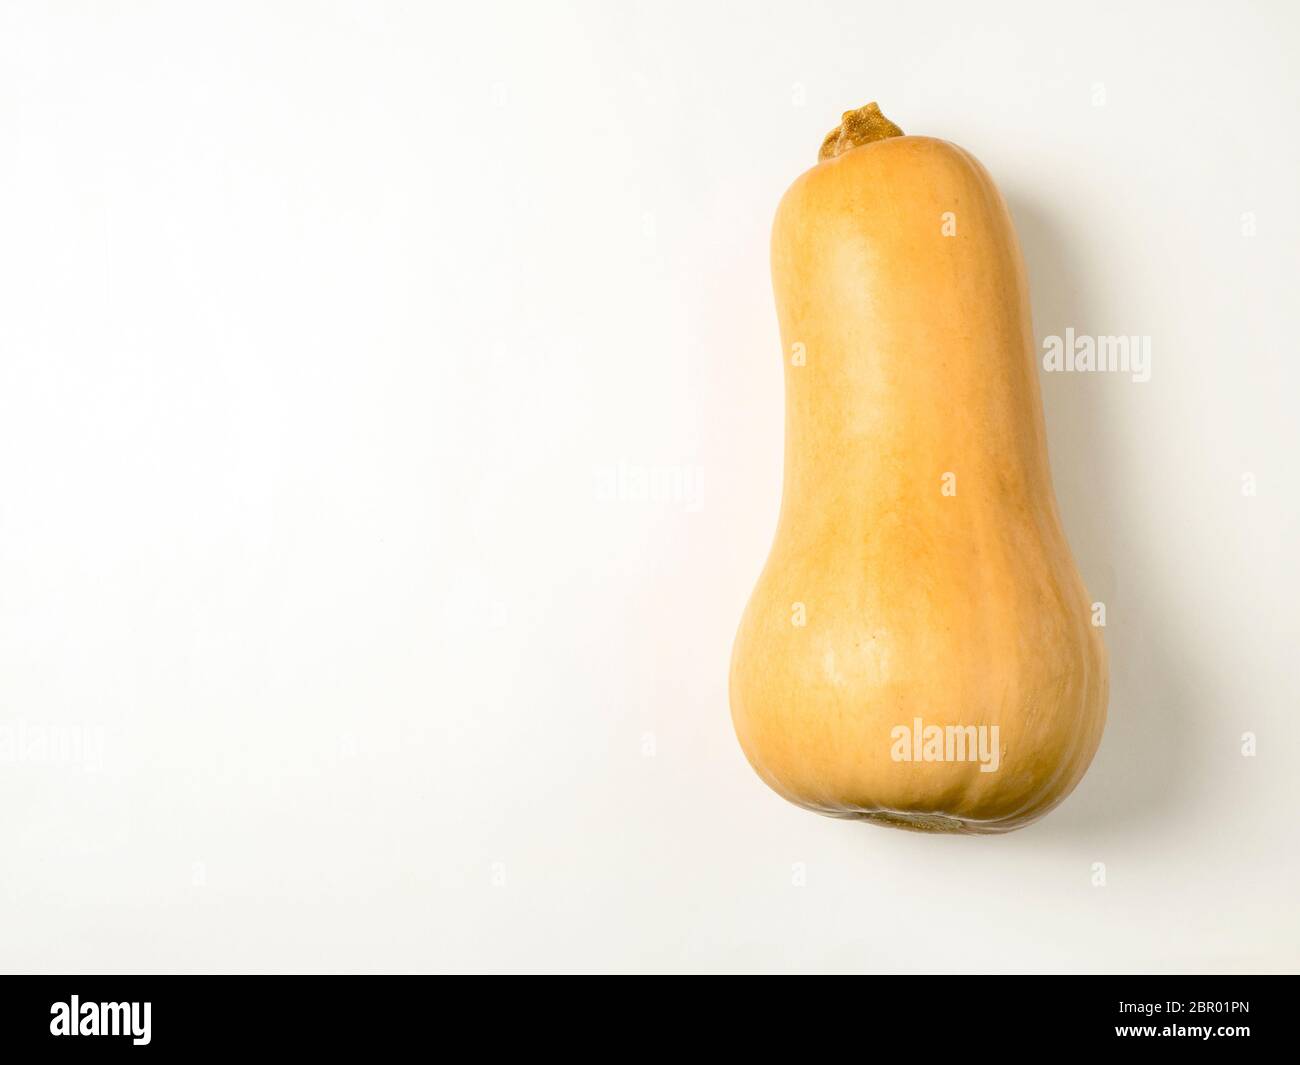 A whole butternut squash isolated on a white background with copy space Stock Photo